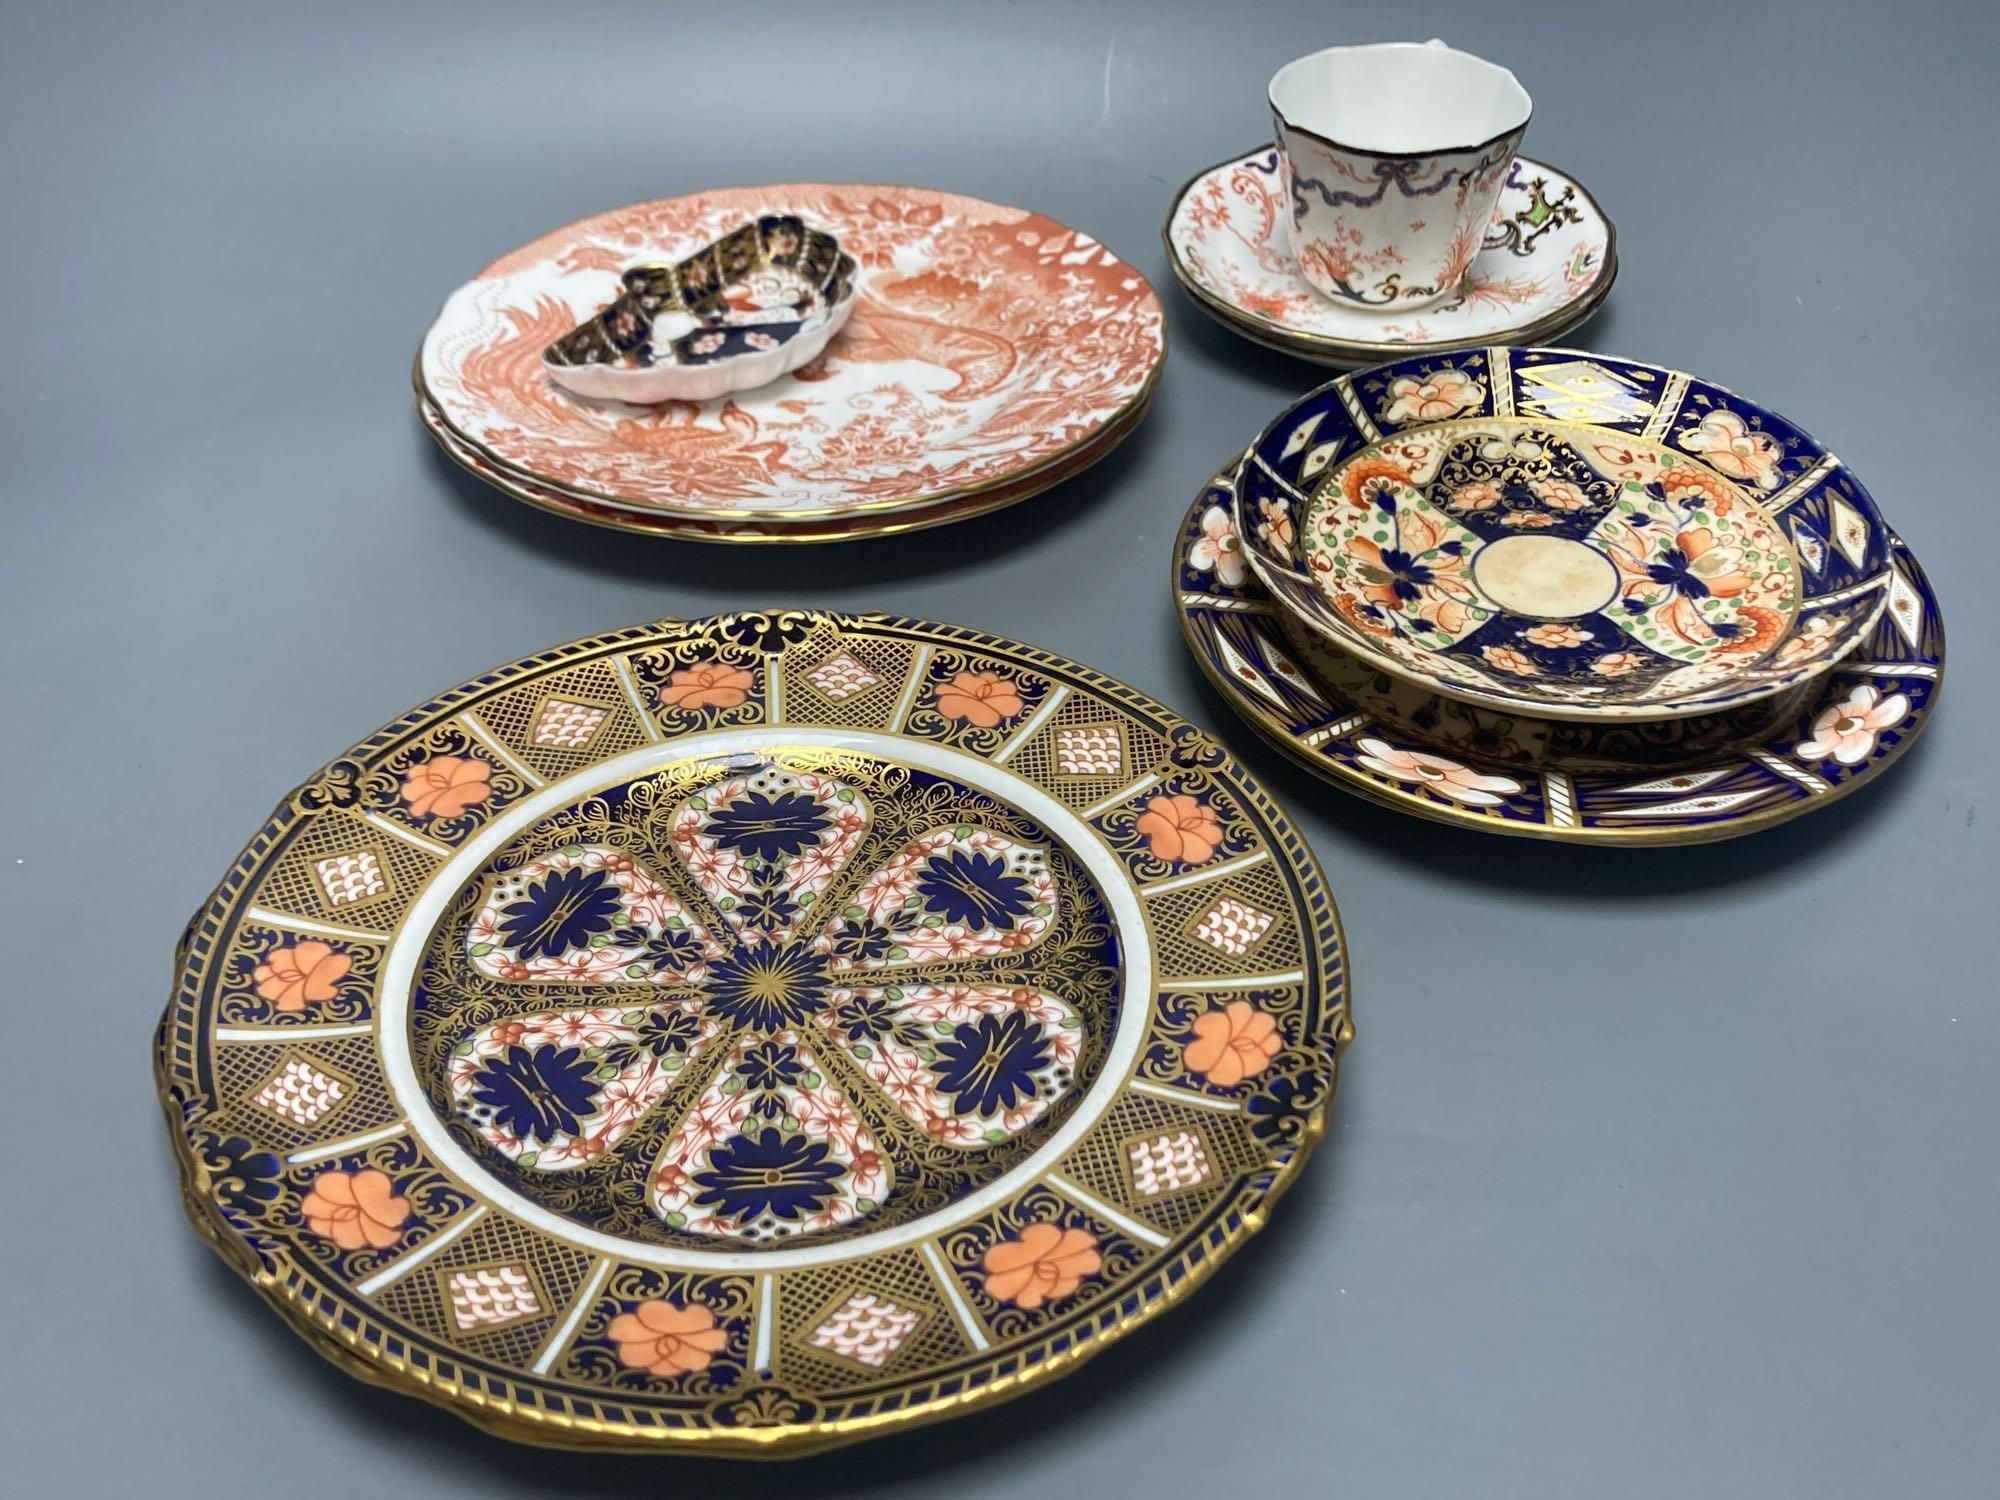 Two Royal Crown Derby Imari pattern plates, three Crown Derby plates or saucers, a Royal Crown Derby cup and two saucers and two Red Av